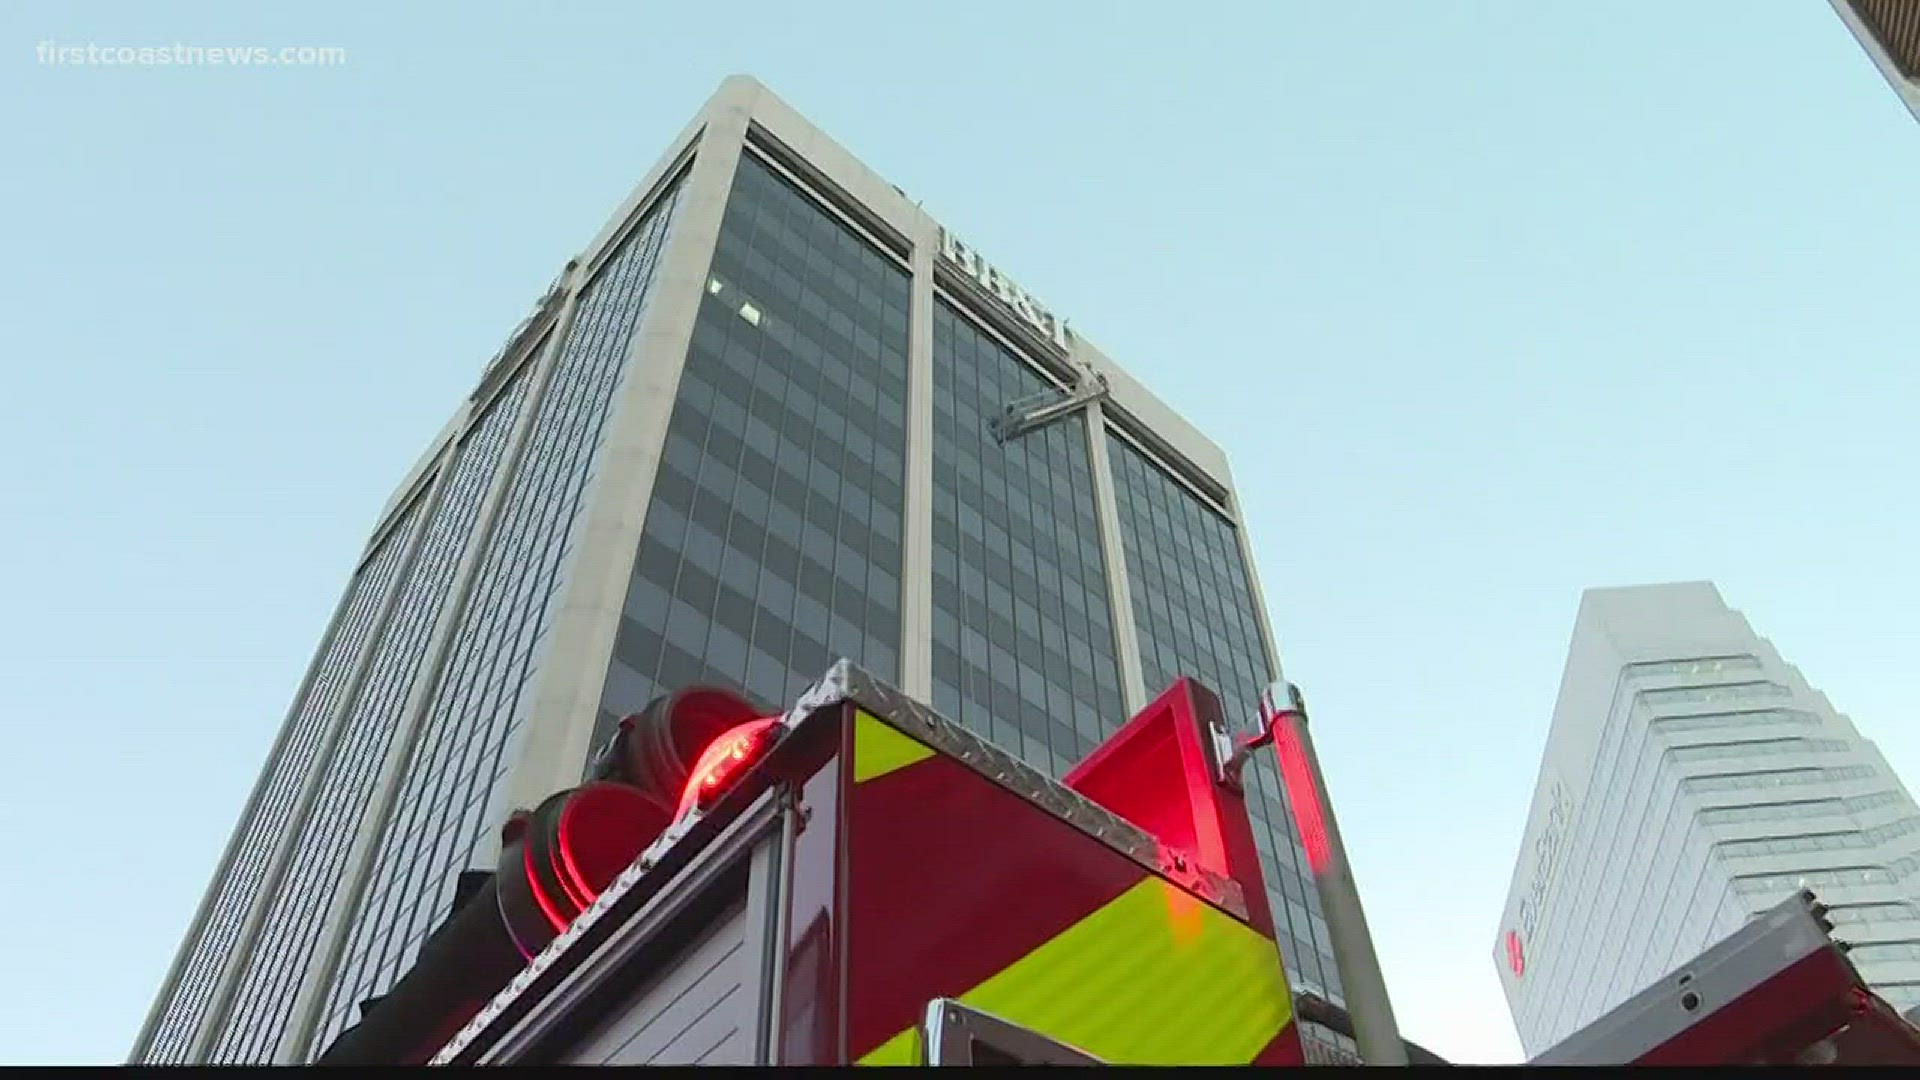 Two window washers were rescued Monday in a dramatic display in downtown Jacksonville on Monday.